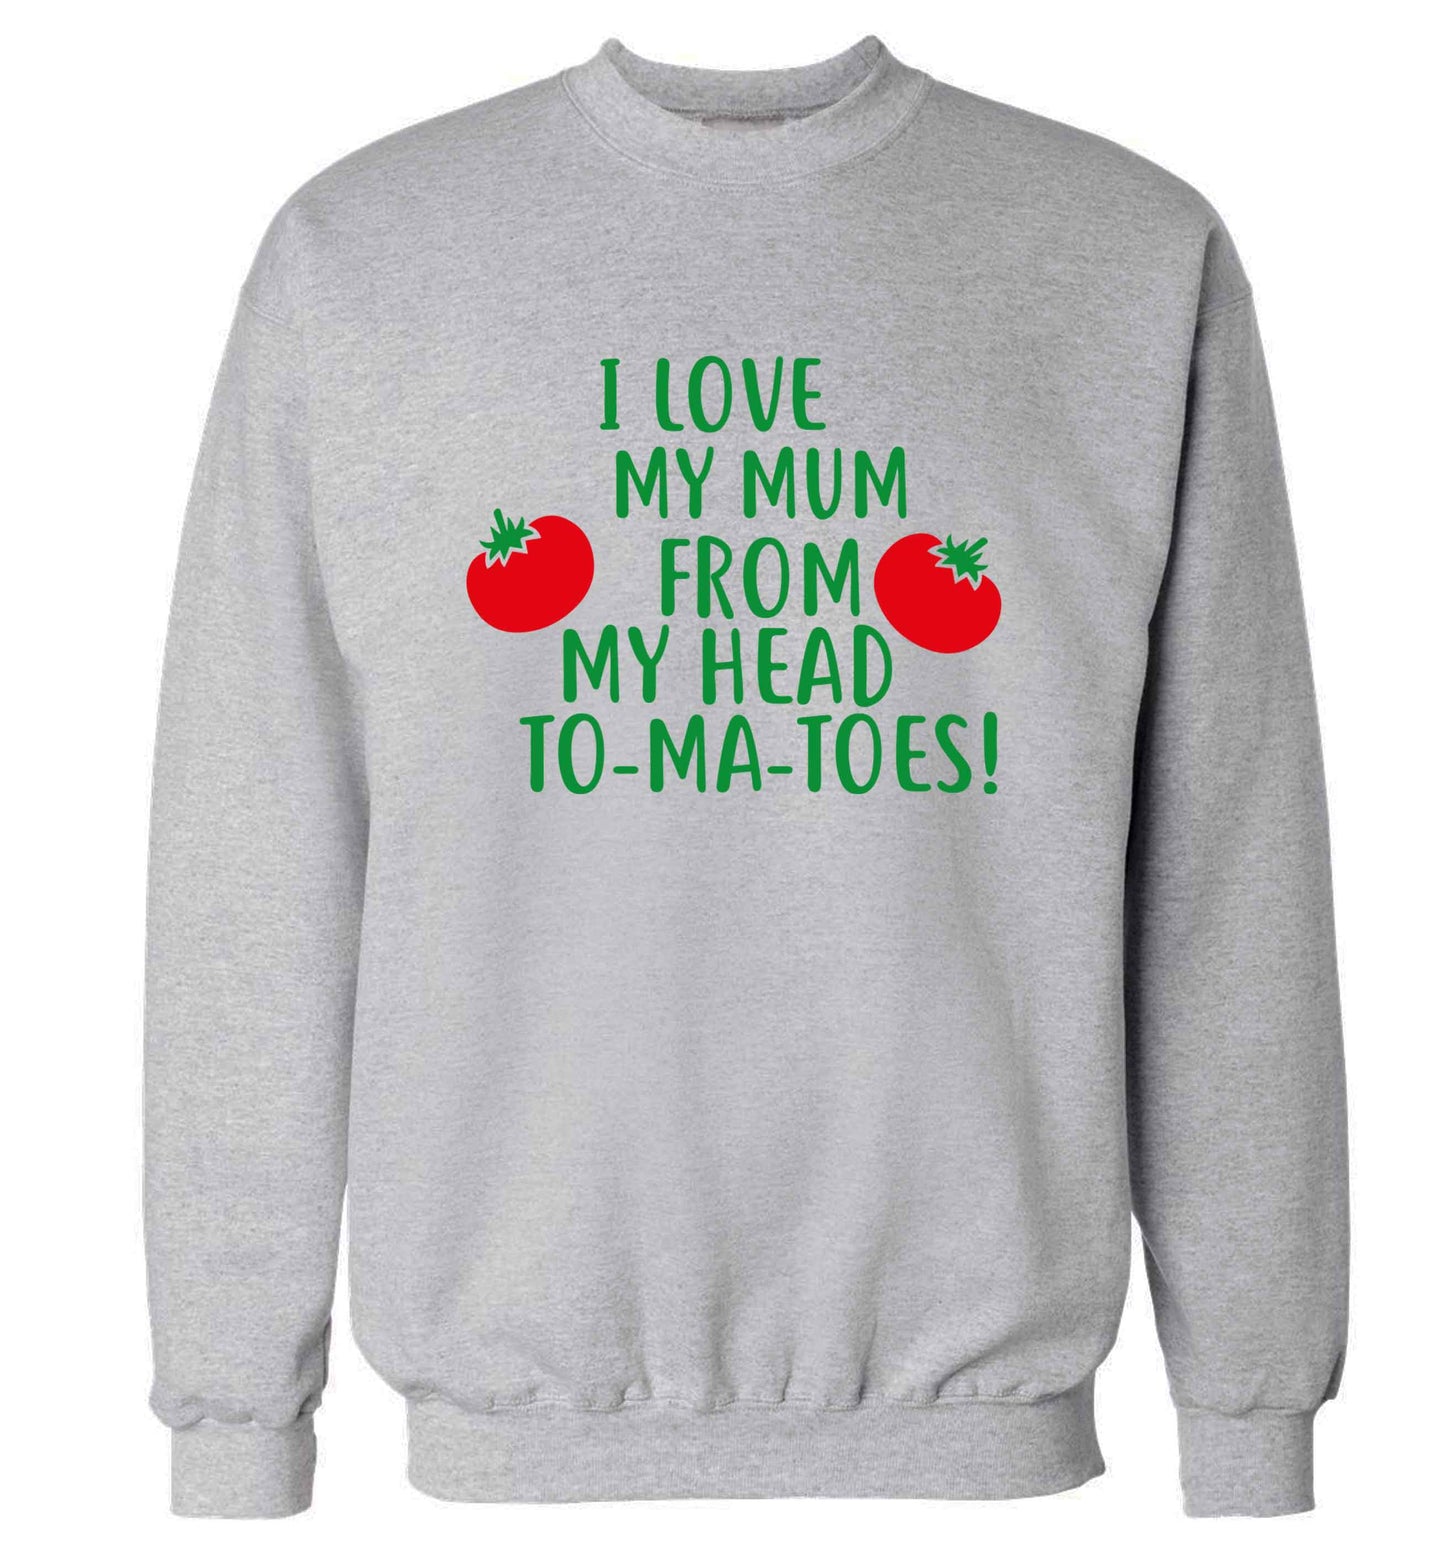 I love my mum from my head to-my-toes! adult's unisex grey sweater 2XL